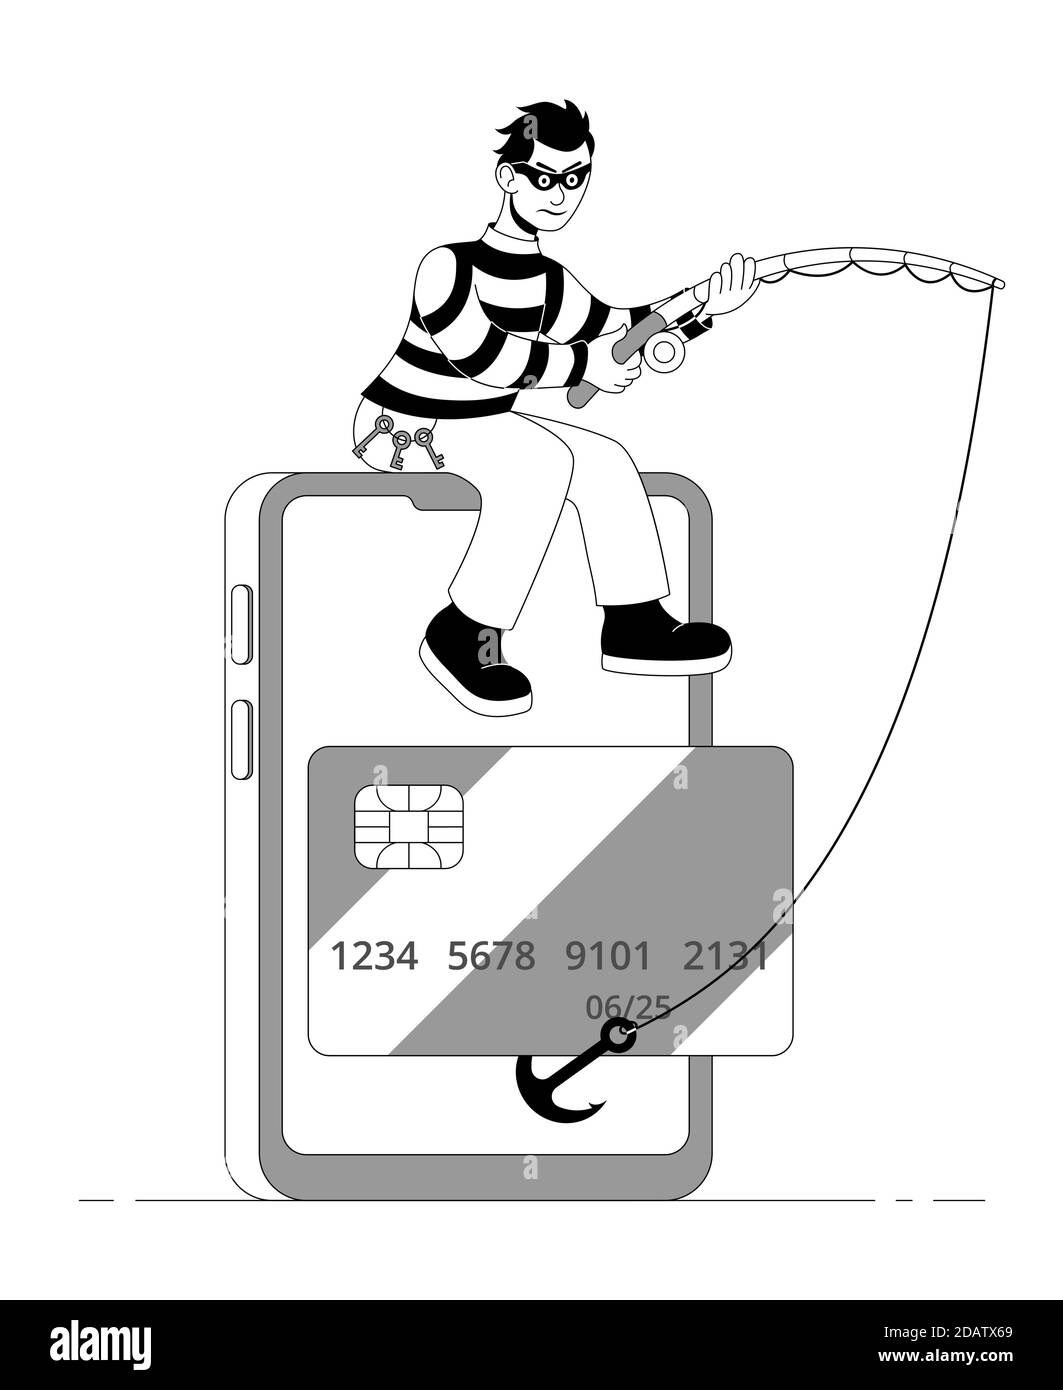 Masked robber with a fishing rode stealing credit card from a smartphone. Cartoon flat vector illustration. Stock Vector